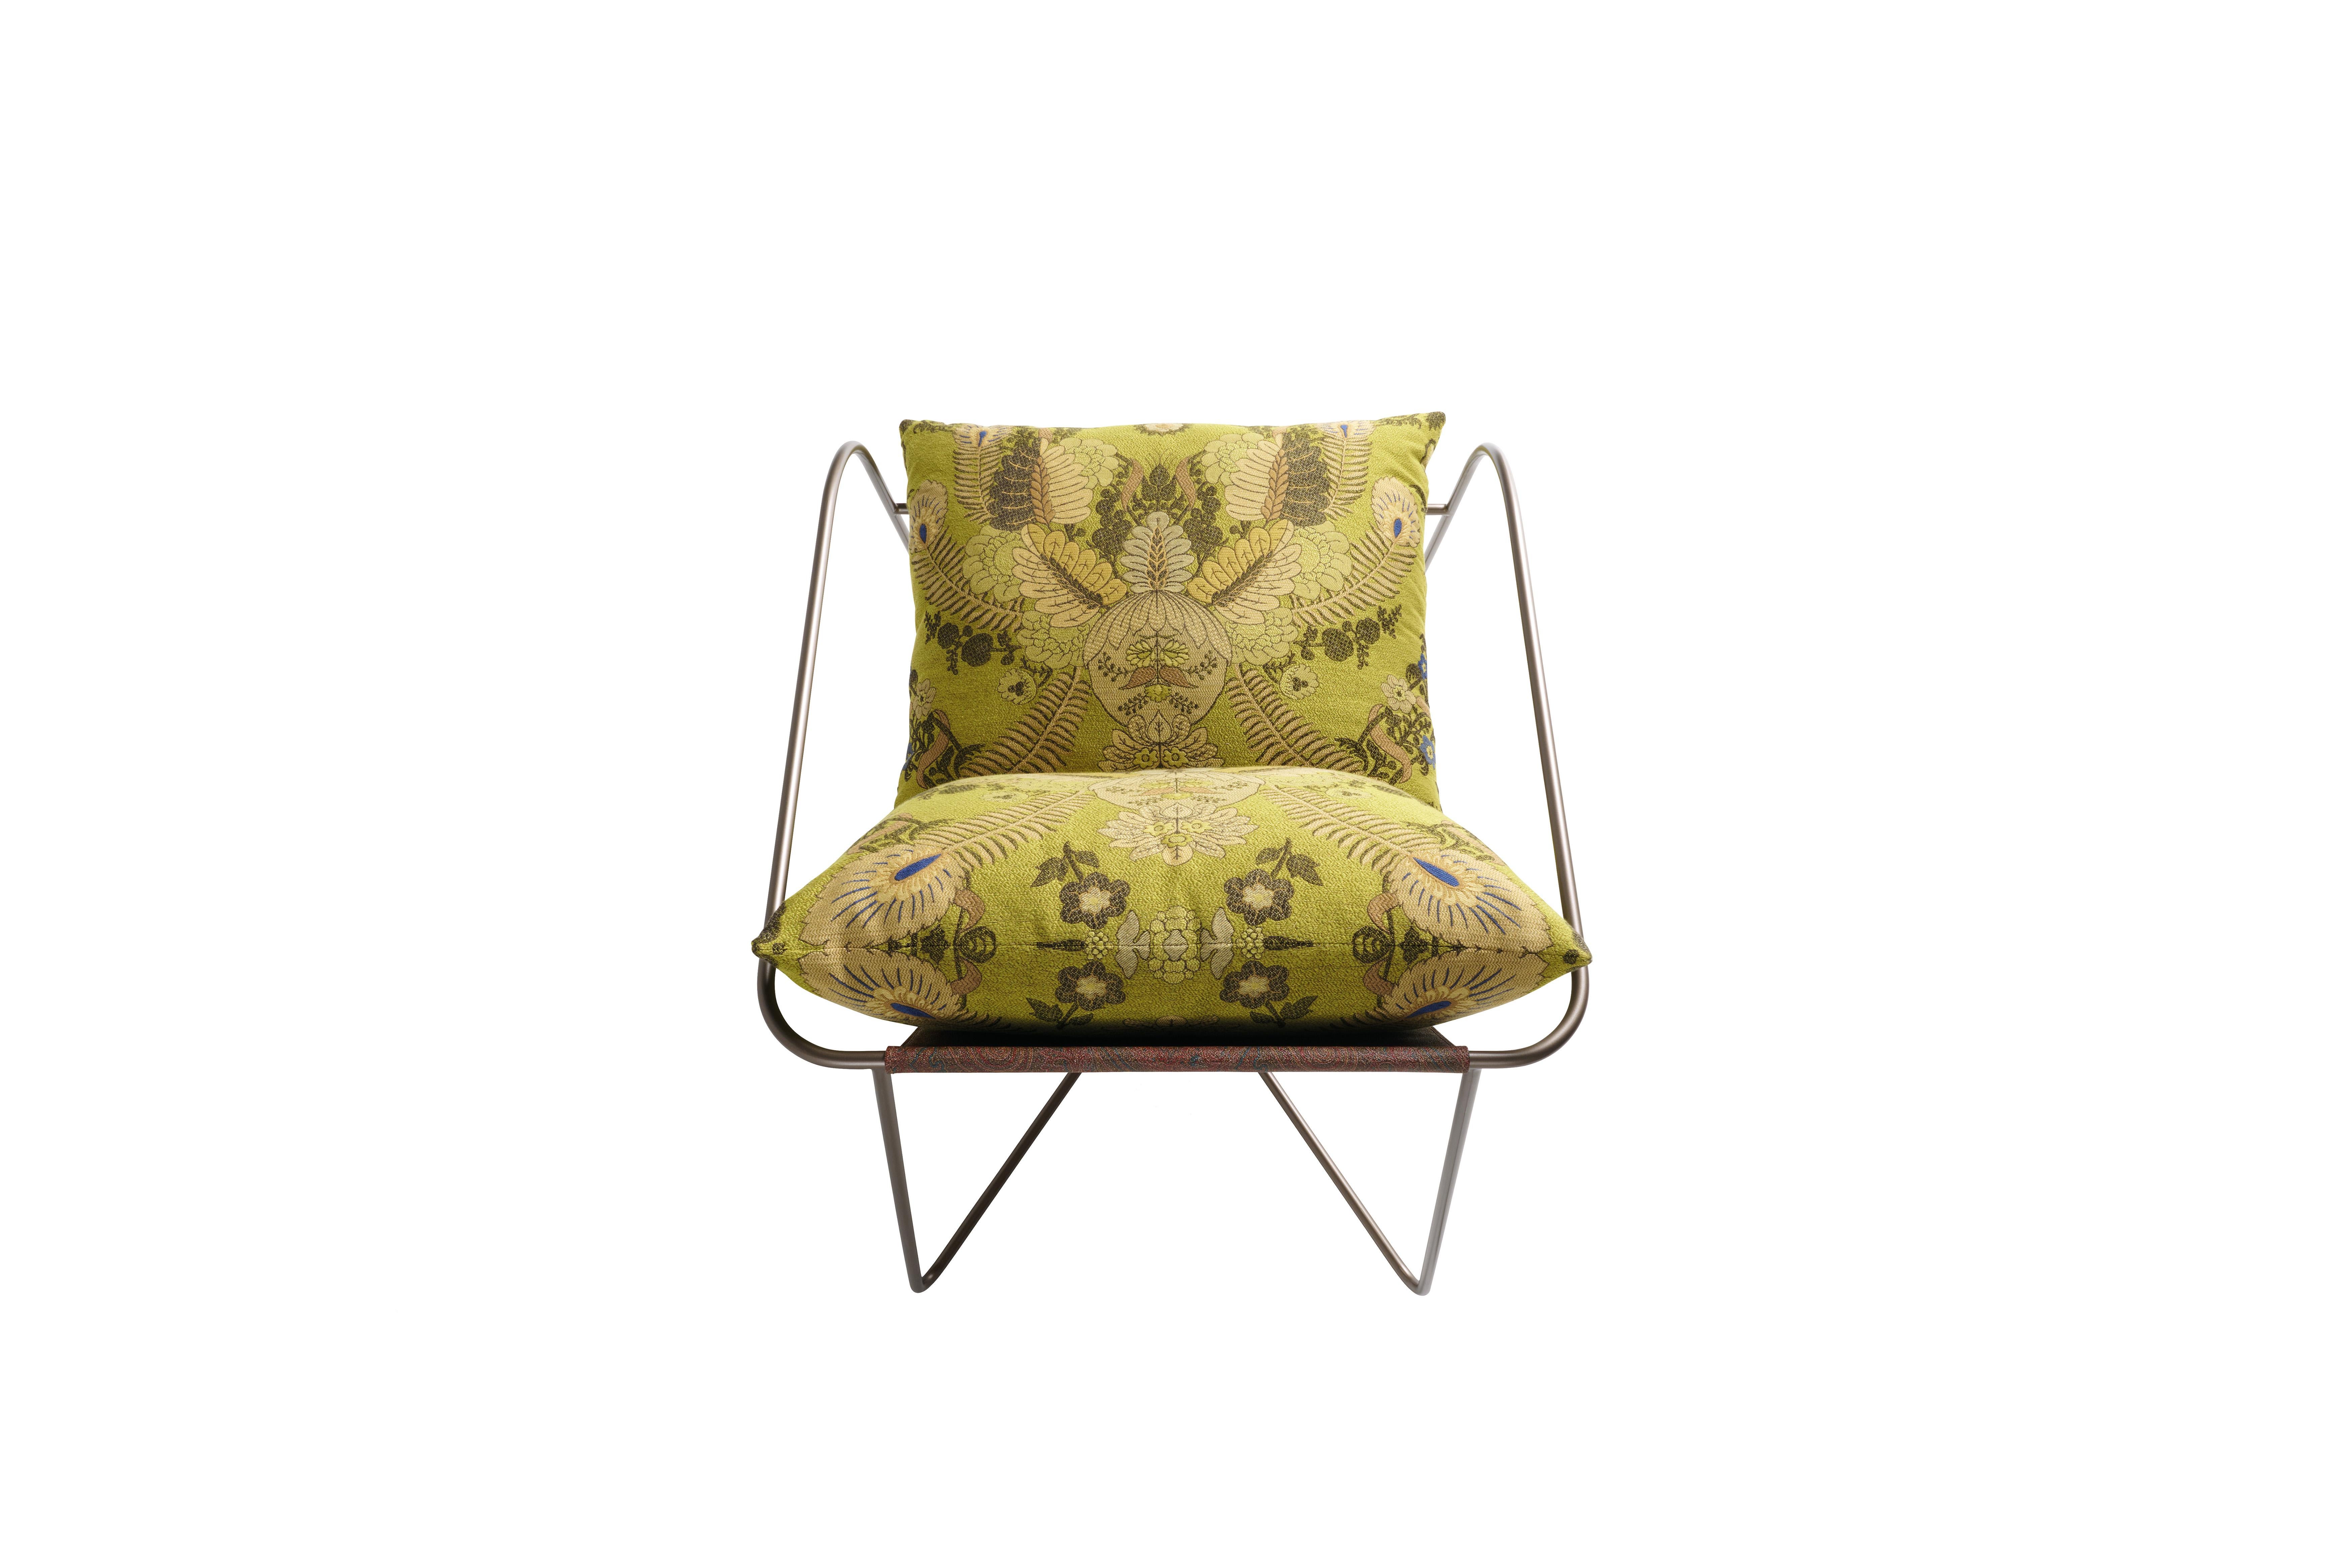 Modern 21st Century Levity Armchair in Green Jacquard Fabric by Etro Home Interiors For Sale